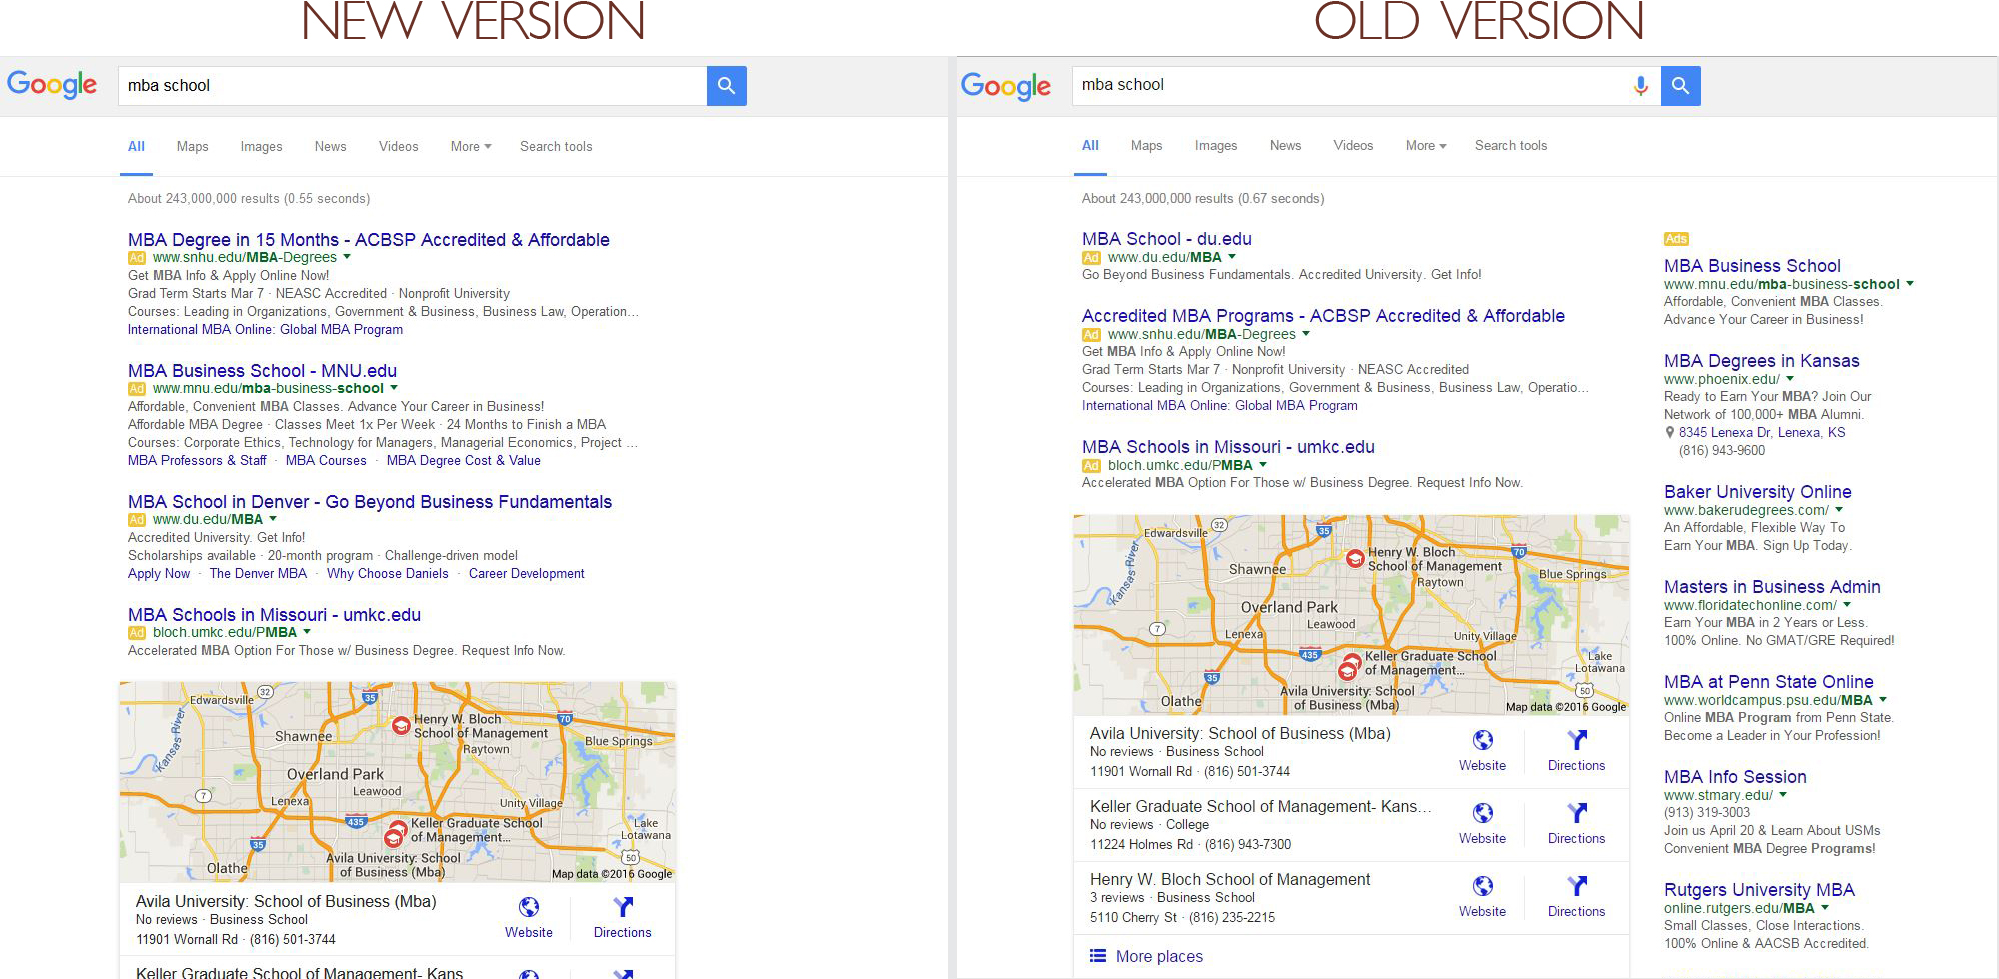 Google Sidebar Ads Before and After